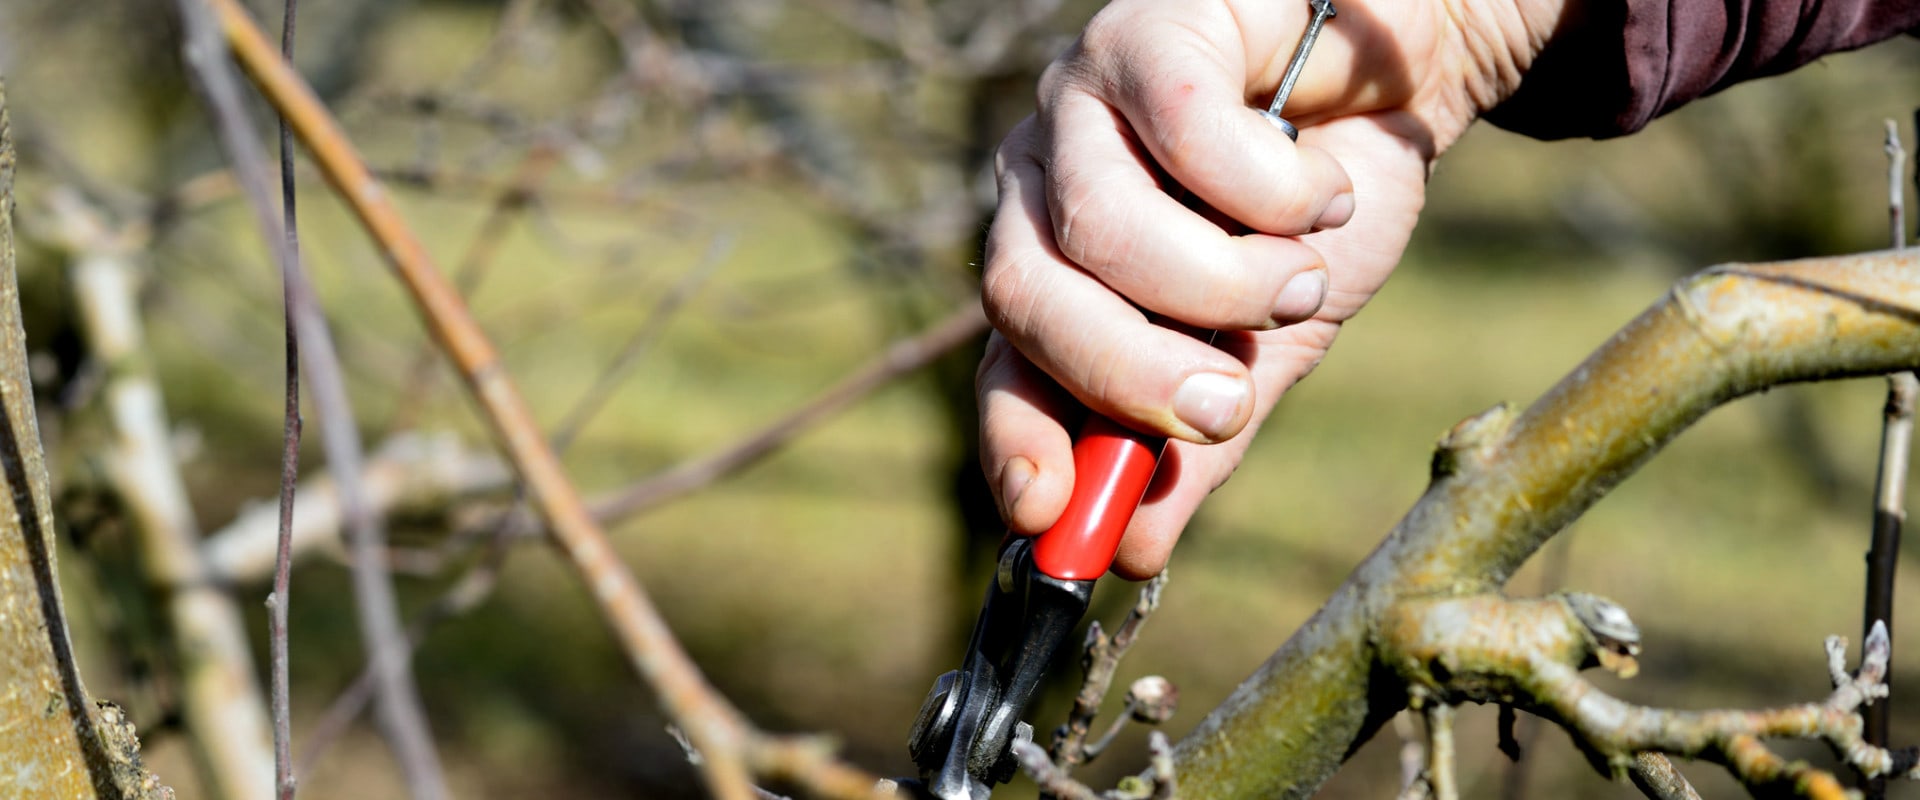 How do you know when your tree needs pruning?